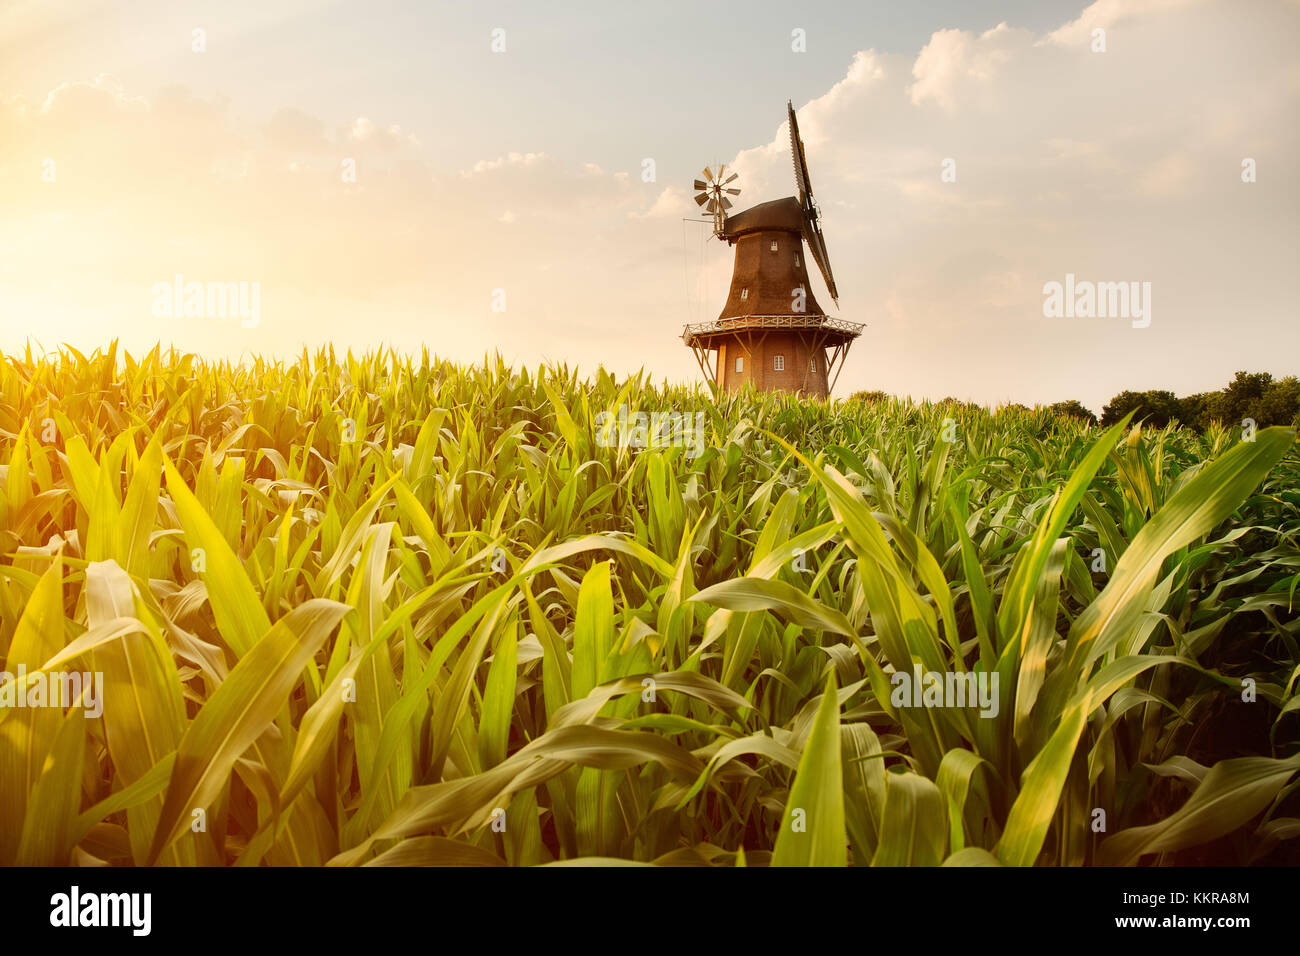 The Holtlander mill in Holtland near Hesel, East Frisia Stock Photo